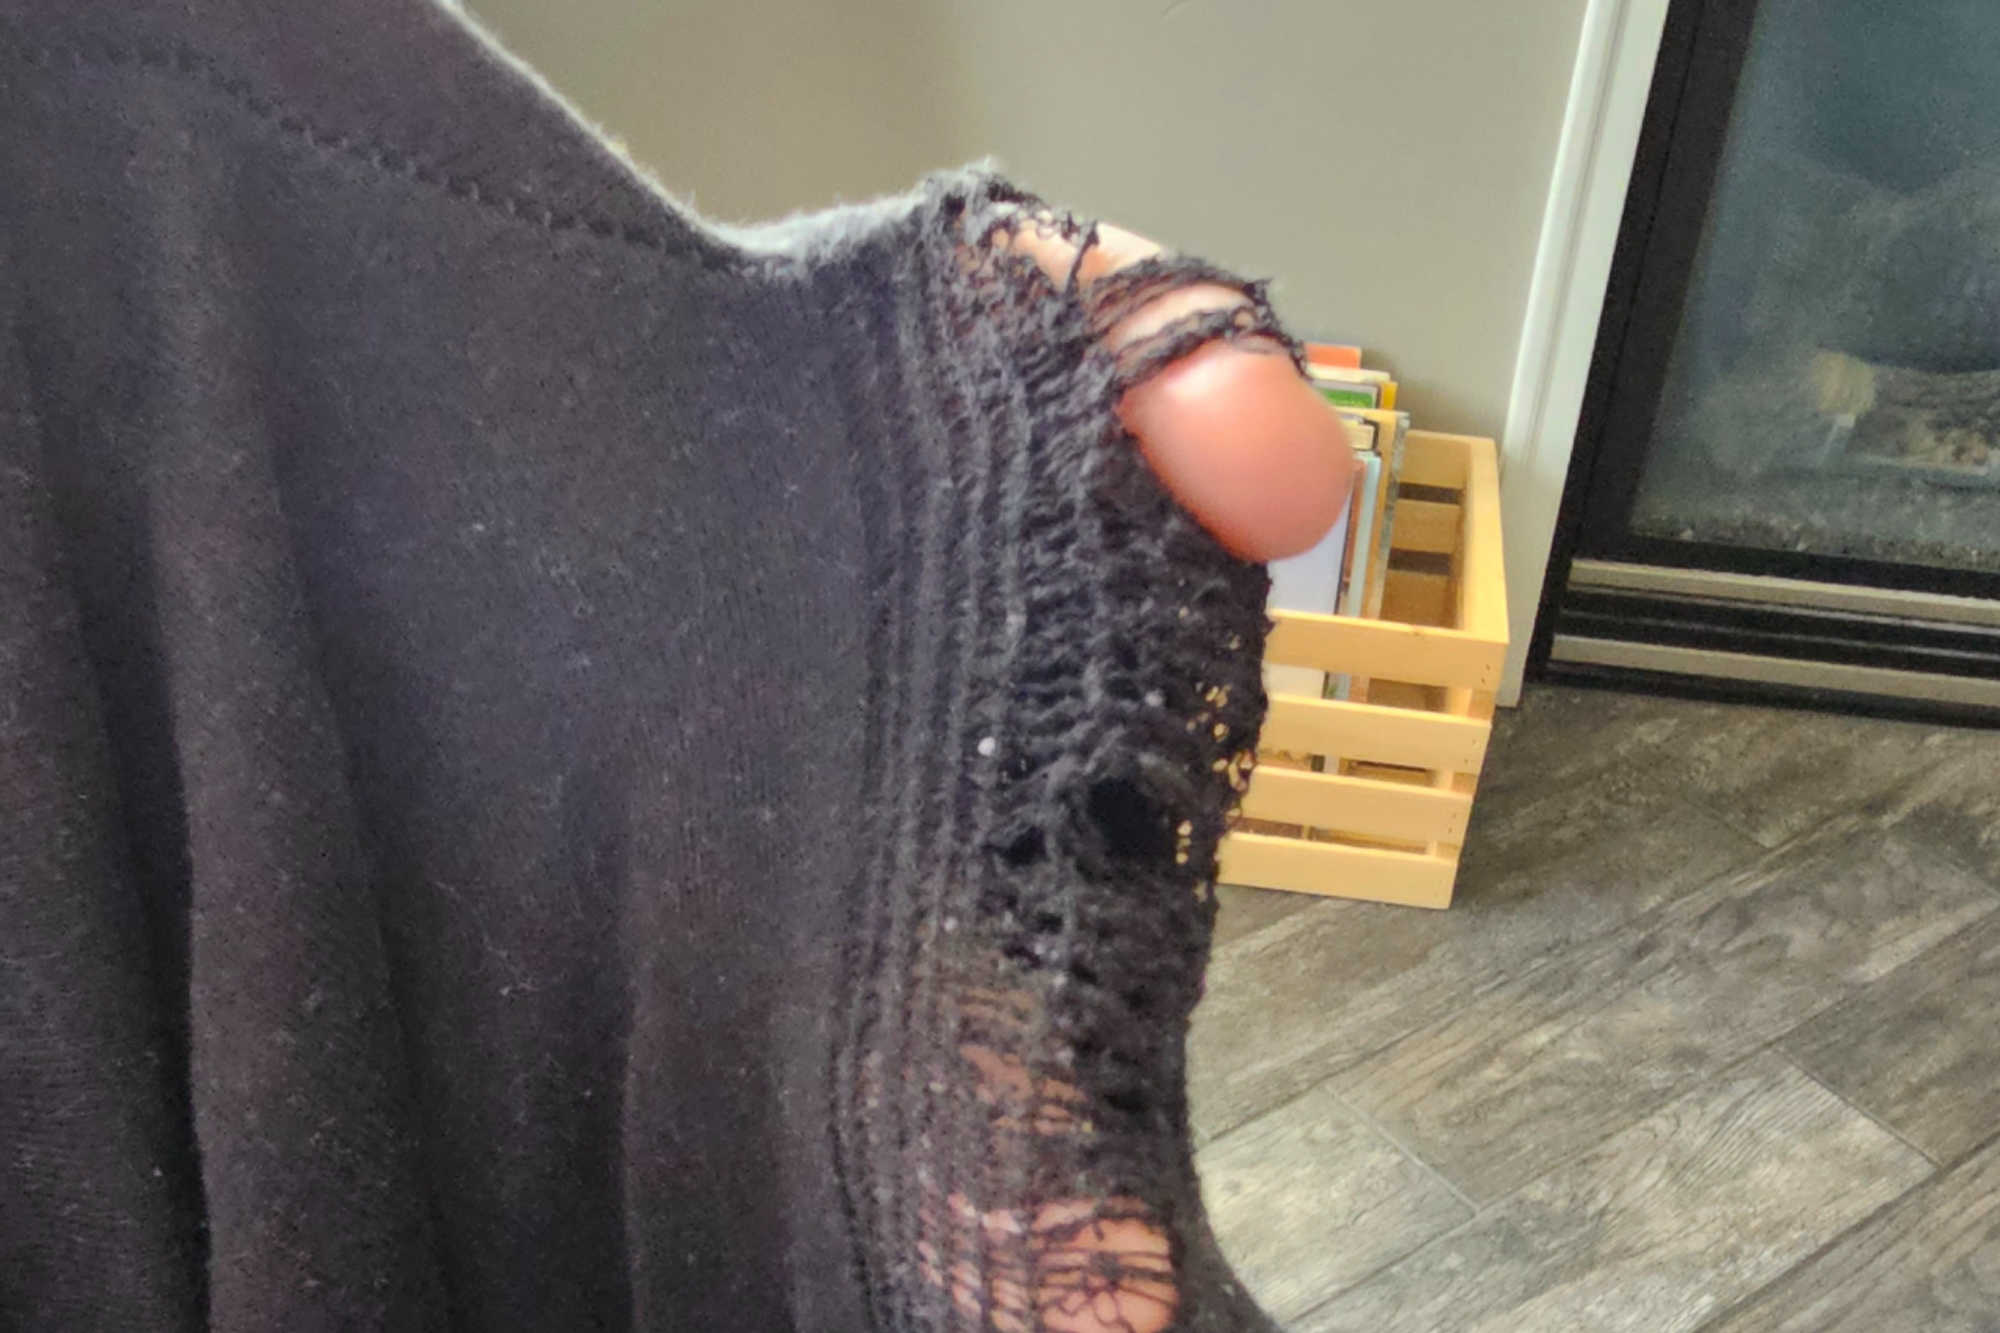 A finger poking through a hole in a pair of threadbare pants. These pants will need to be thrown out rather than donated.